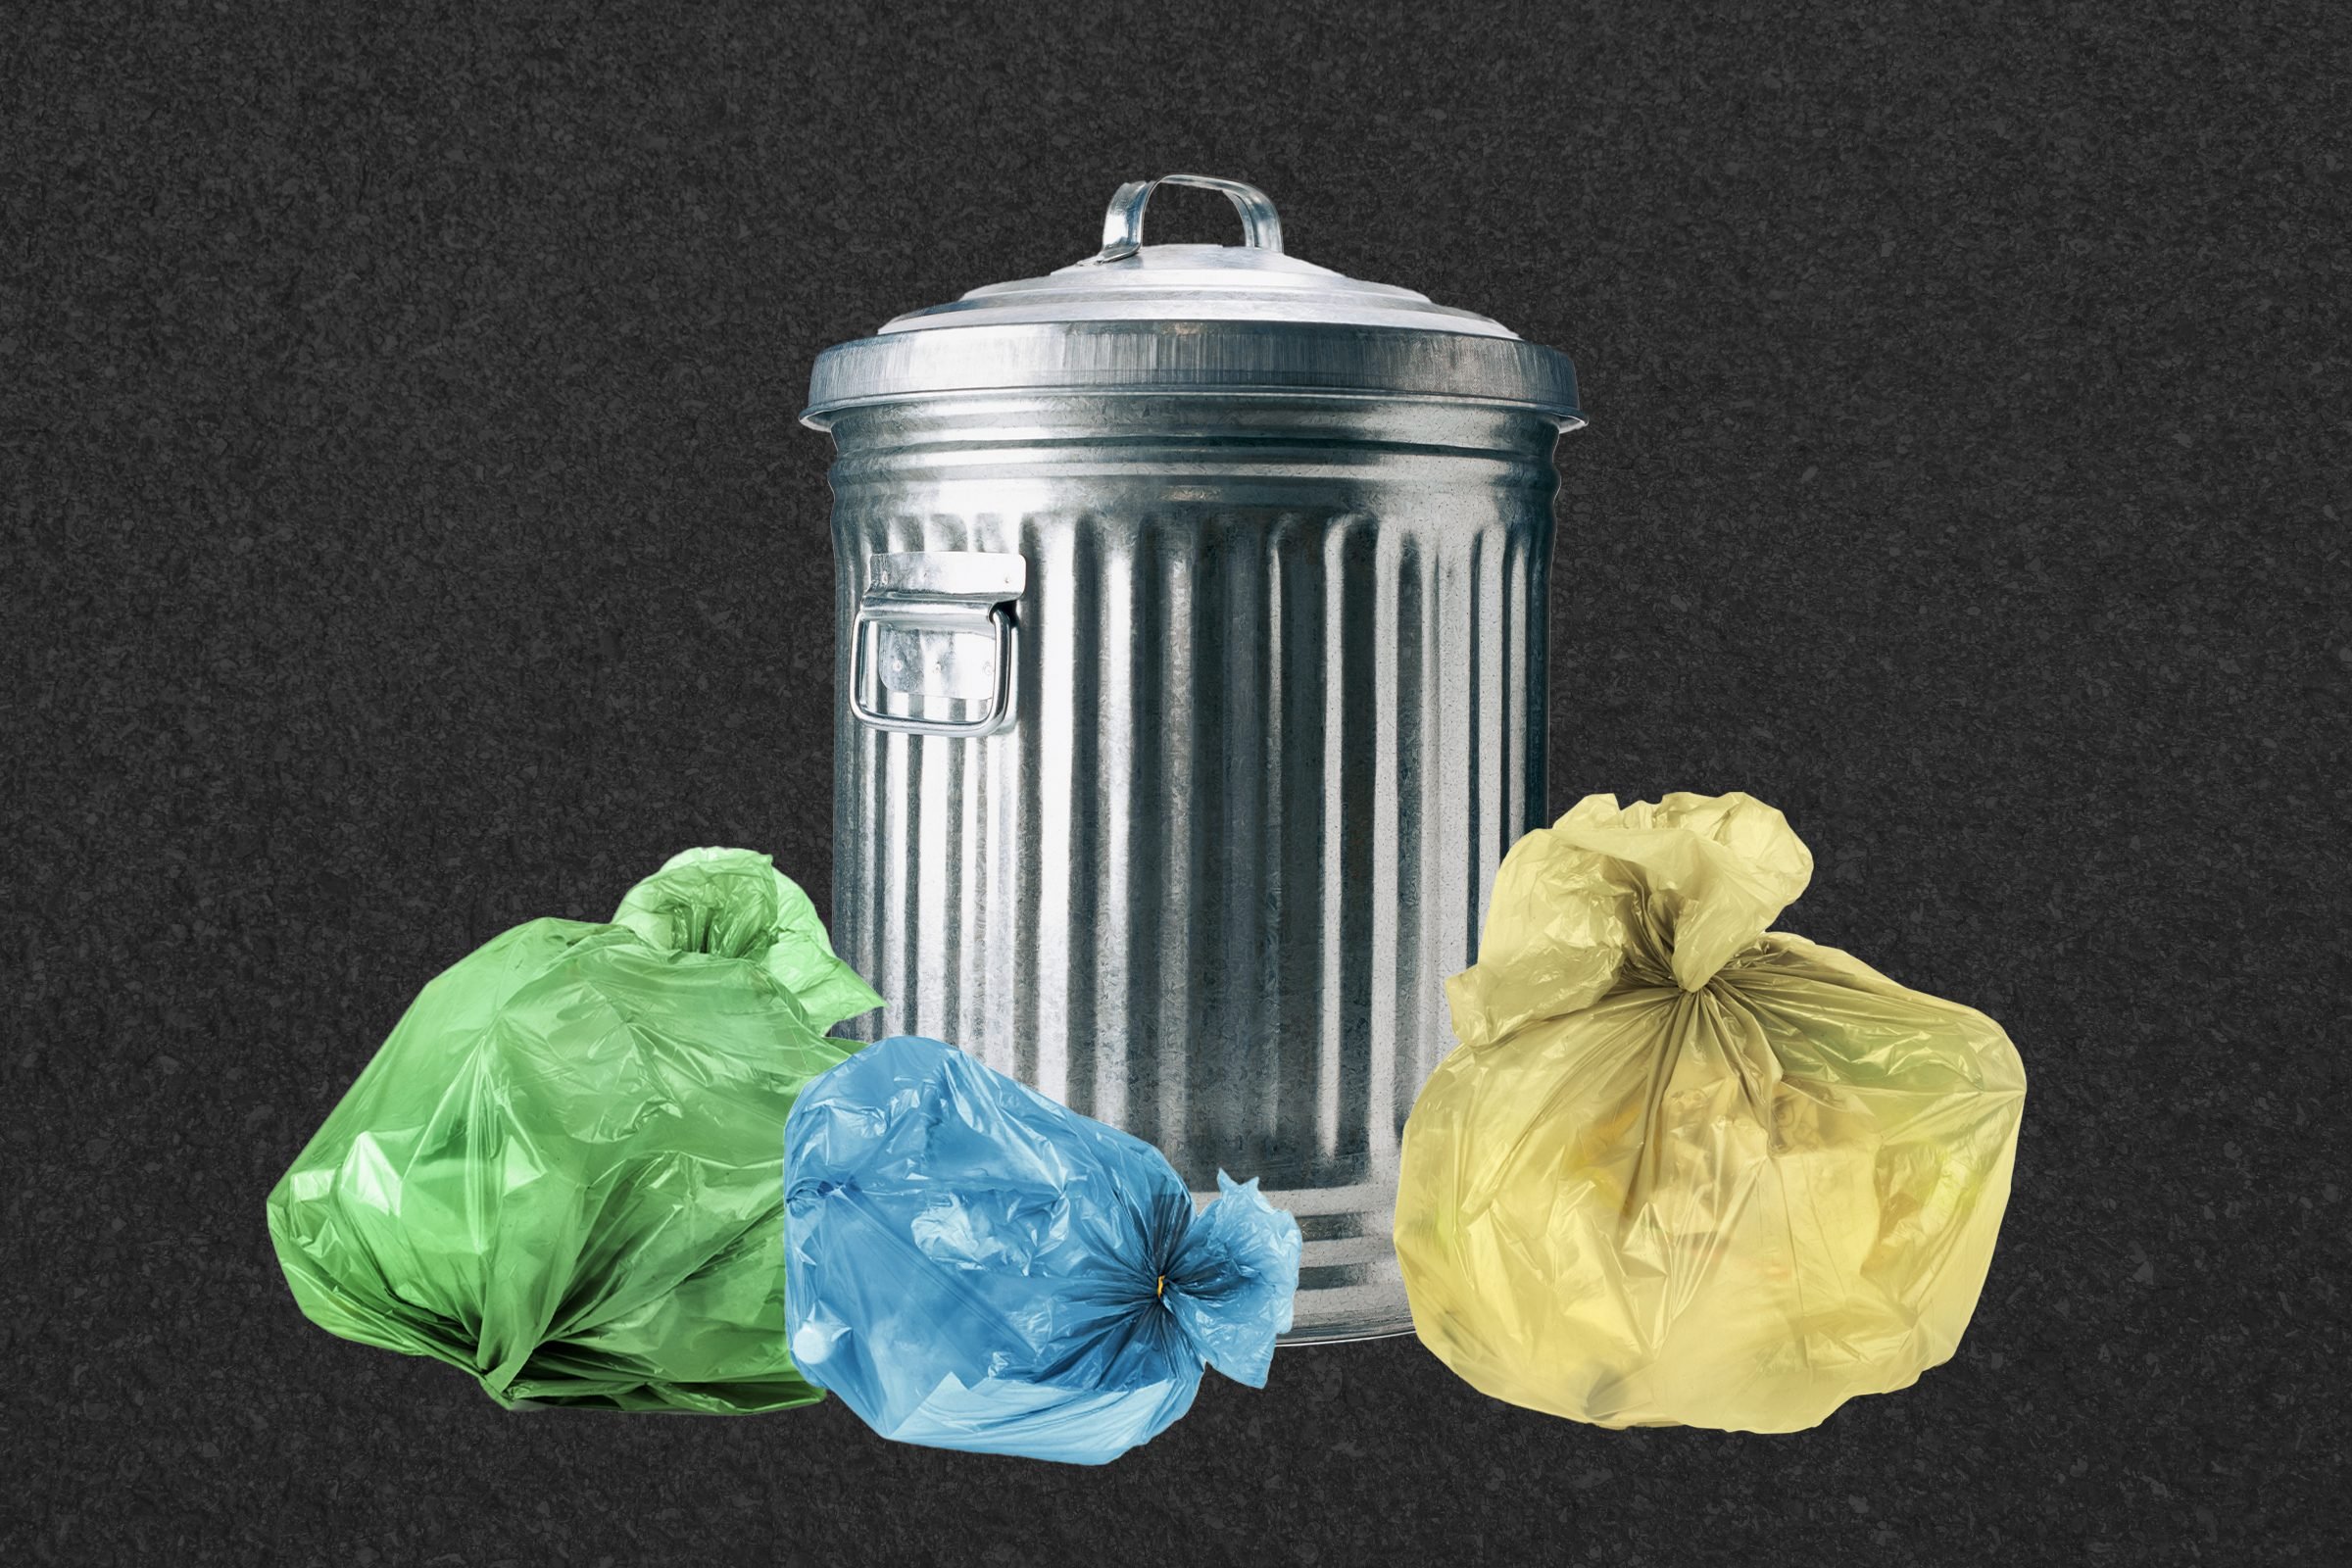 Craziest Things Garbage Collectors Found in the Trash | Reader's Digest